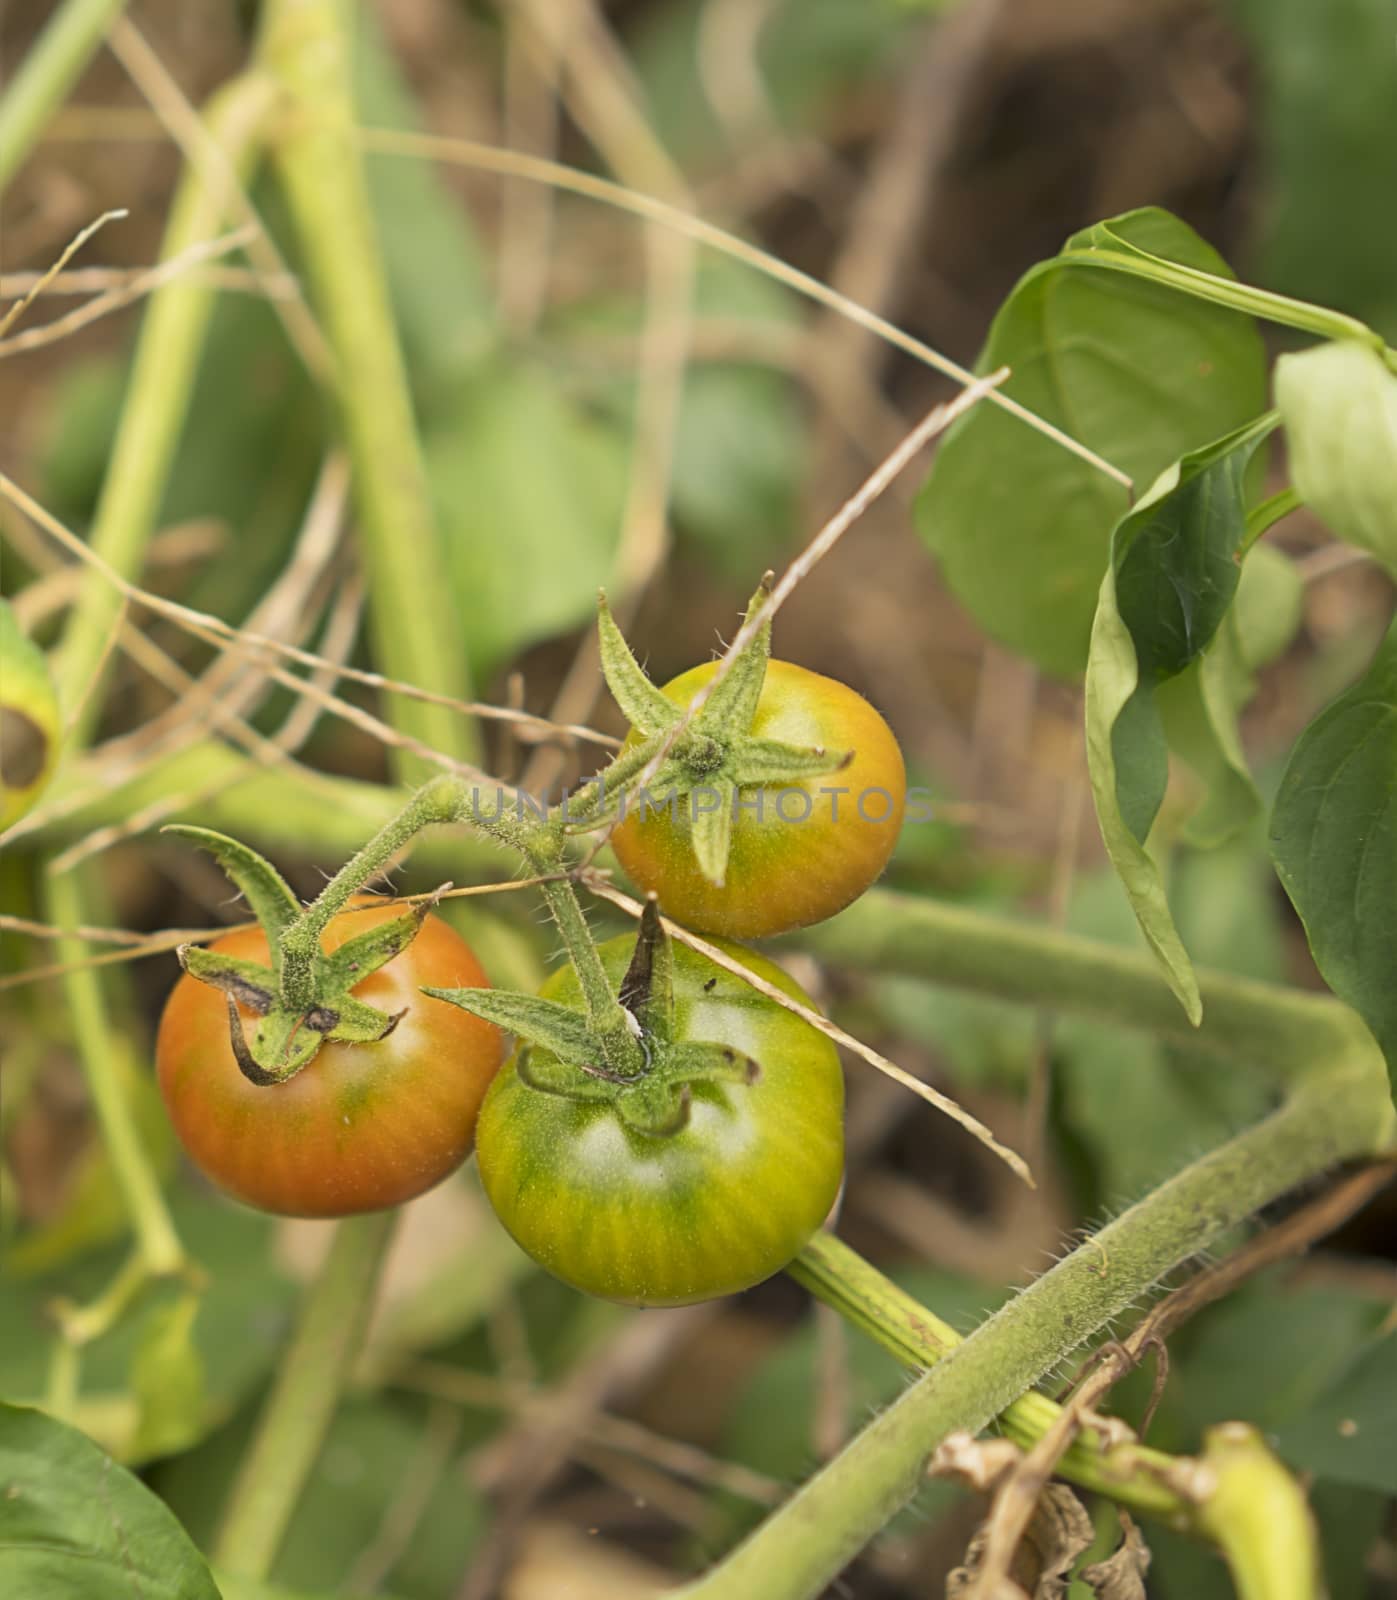 Wild Australian bush tomatoes ripening on vine with red tomato and green tomato